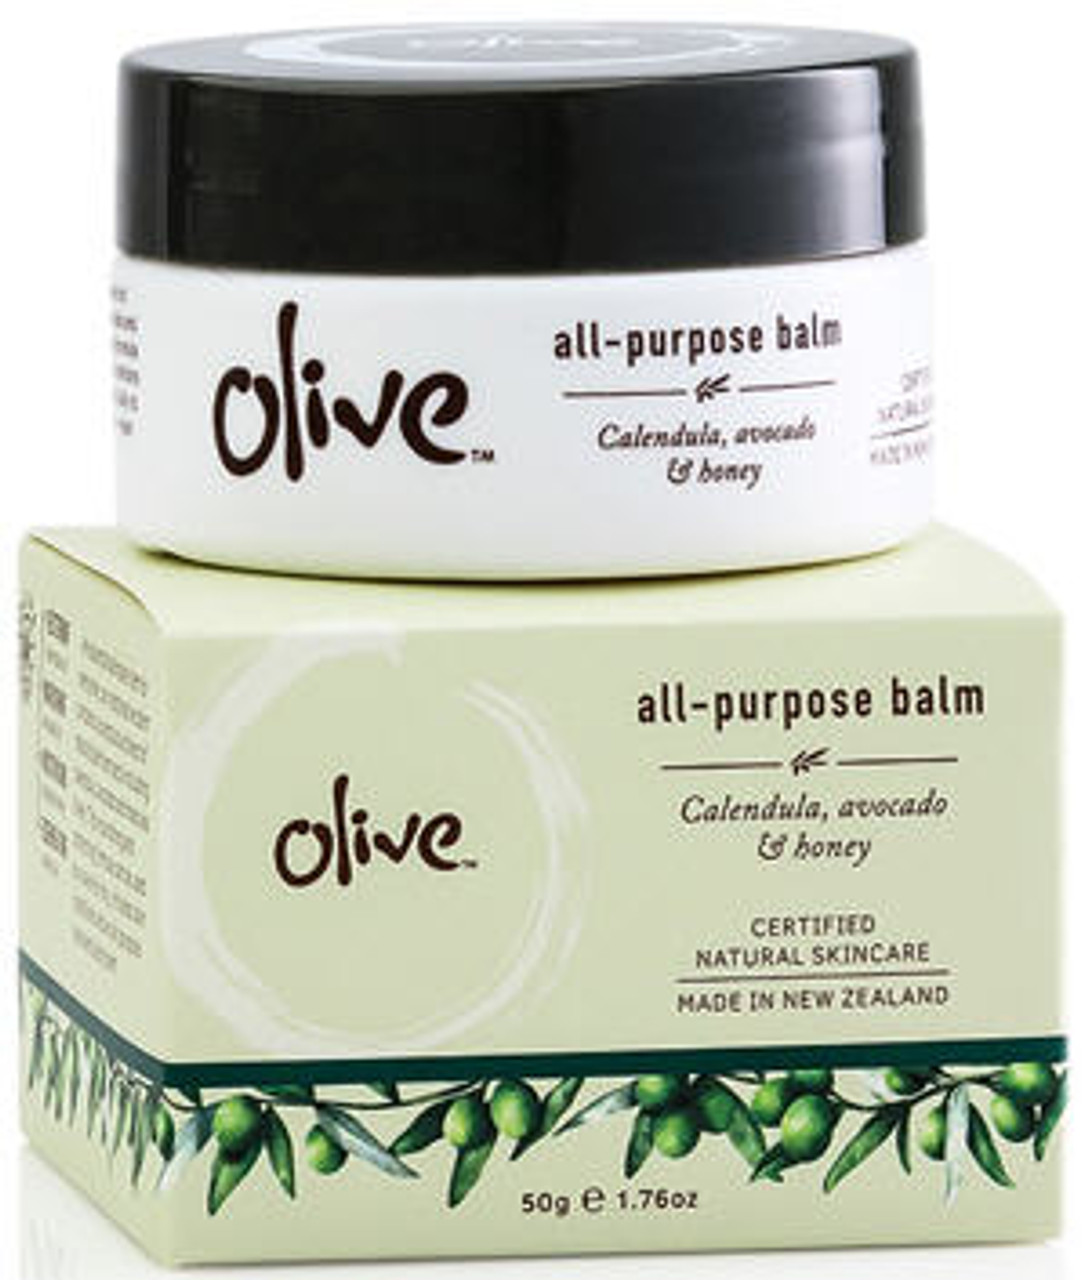 https://cdn11.bigcommerce.com/s-f8566/images/stencil/1280x1280/products/3373/4243/Simunovich-Olive-All-Purpose-Balm-50g__24563.1551953635.jpg?c=2